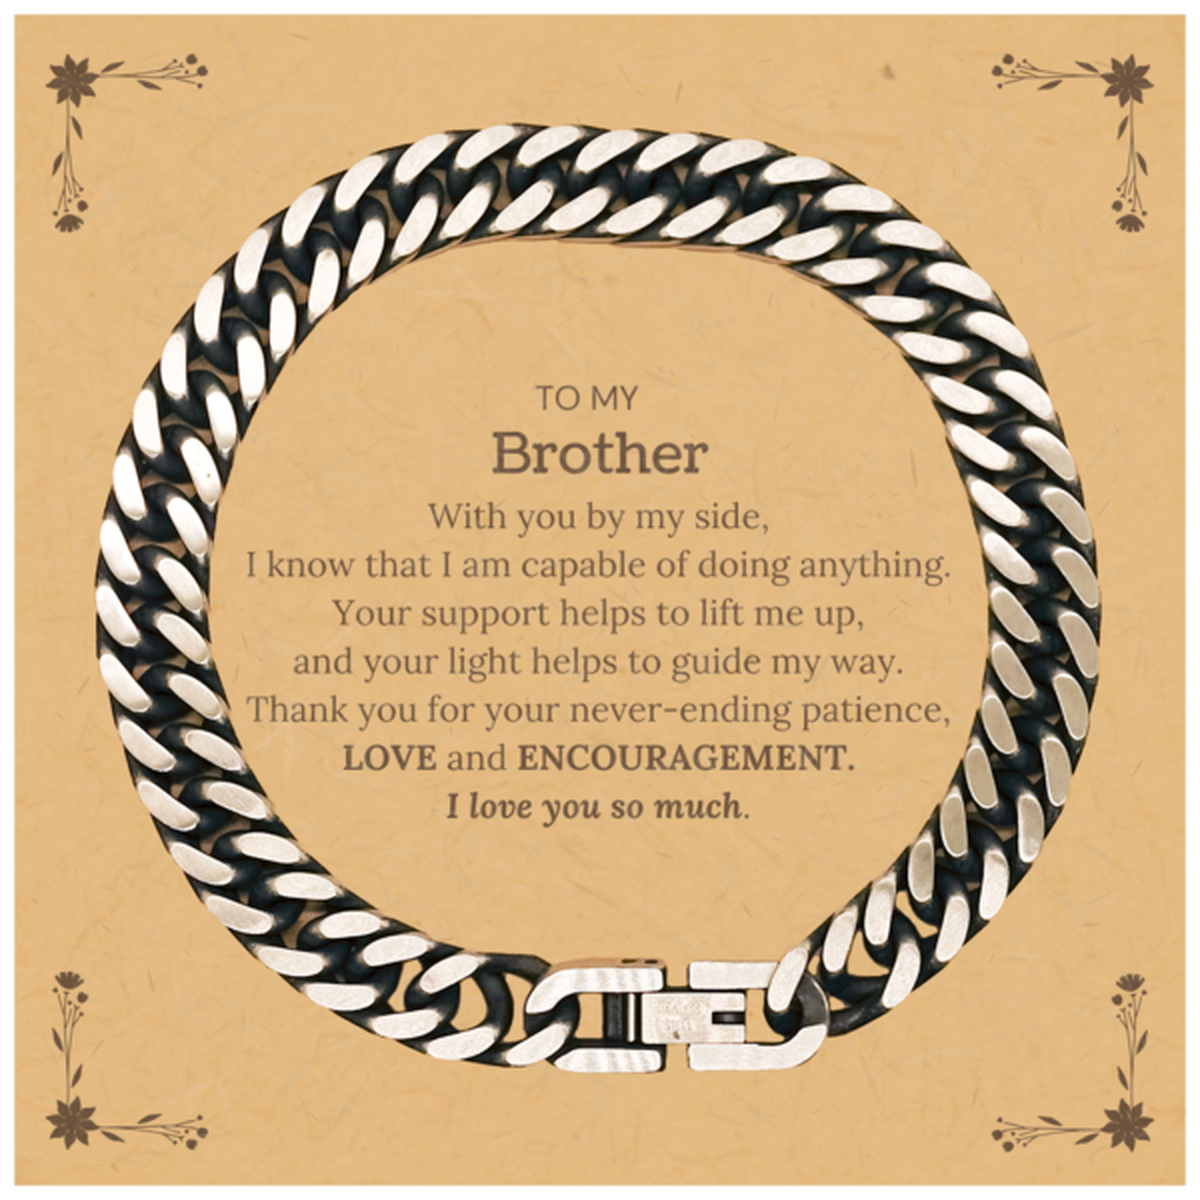 Appreciation Brother Cuban Link Chain Bracelet Gifts, To My Brother Birthday Christmas Wedding Keepsake Gifts for Brother With you by my side, I know that I am capable of doing anything. I love you so much